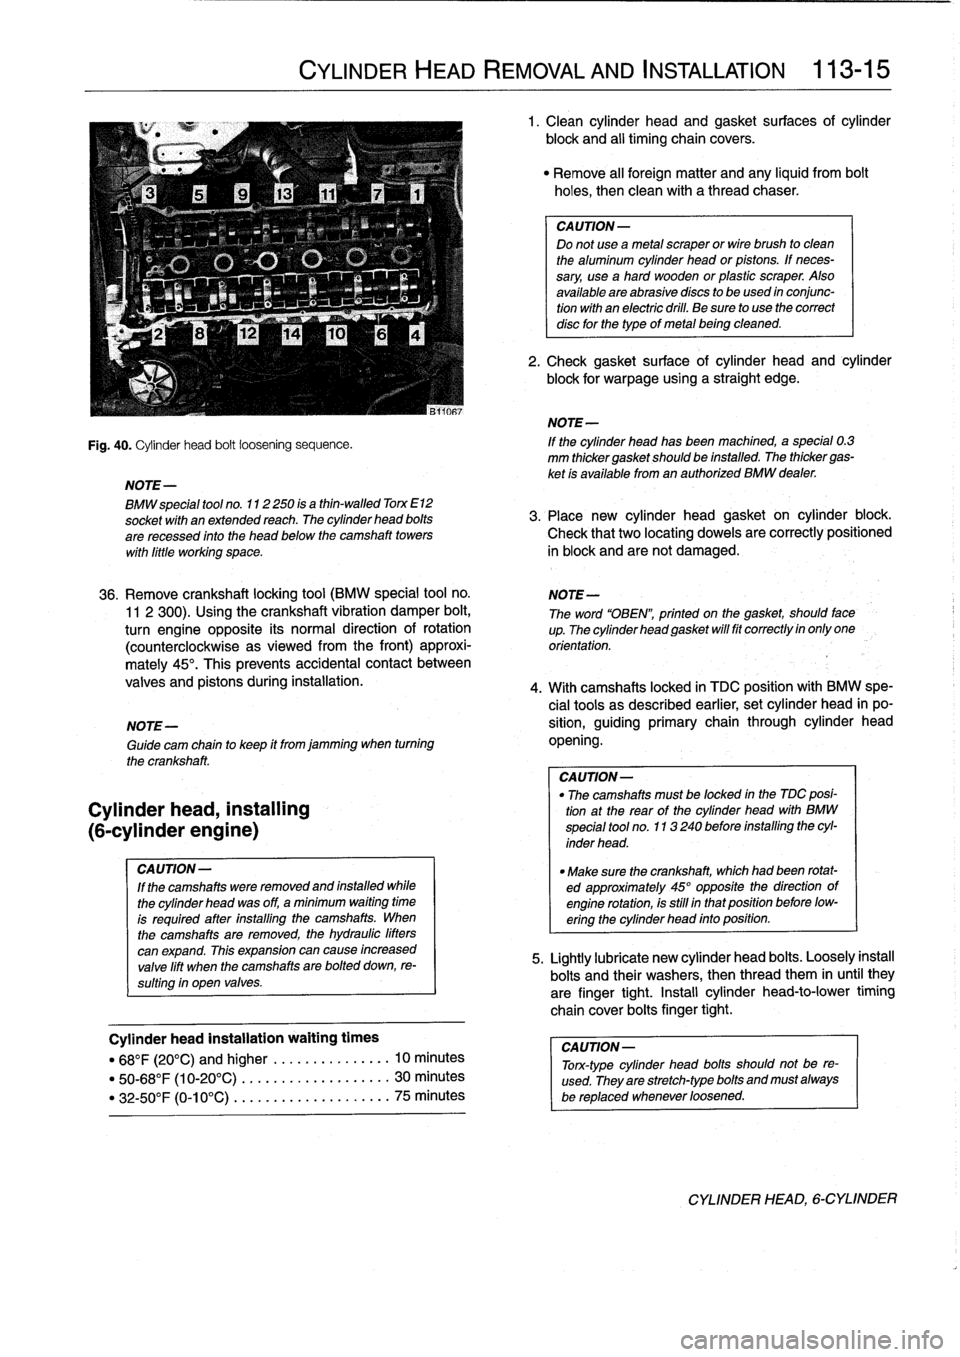 BMW 318i 1992 E36 Workshop Manual 
NOTE-

Cylinder
head,
installing

(6-cylinder
engine)

CAUTION-

If
the
camshafts
were
removed
and
installed
while

the
cylinder
head
was
off,
a
minimum
waiting
time

is
required
after
ínstalling
th